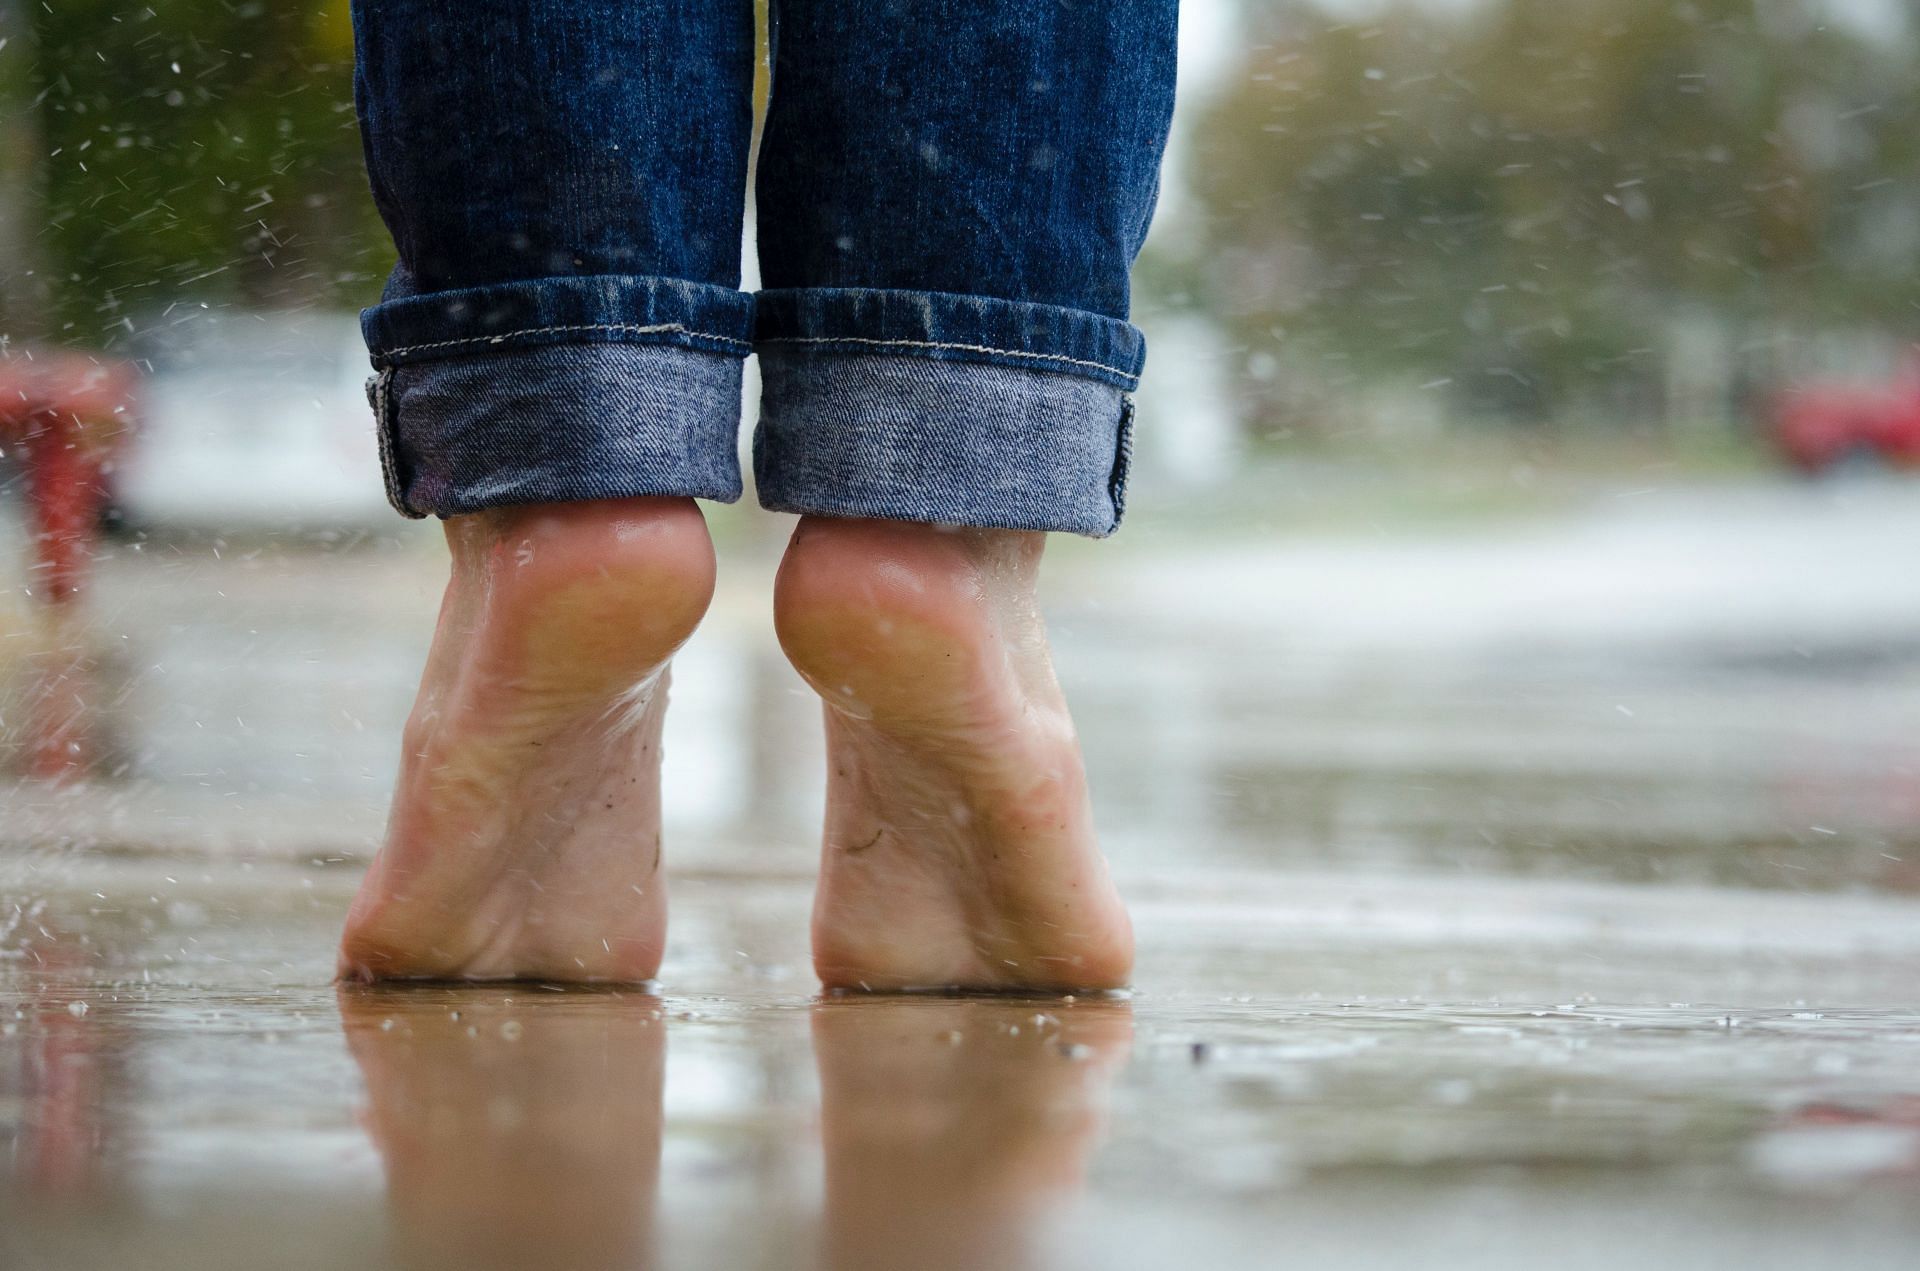 Make sure to keep your feet dry and clean (Image via Pexels/Alicia Zinn)